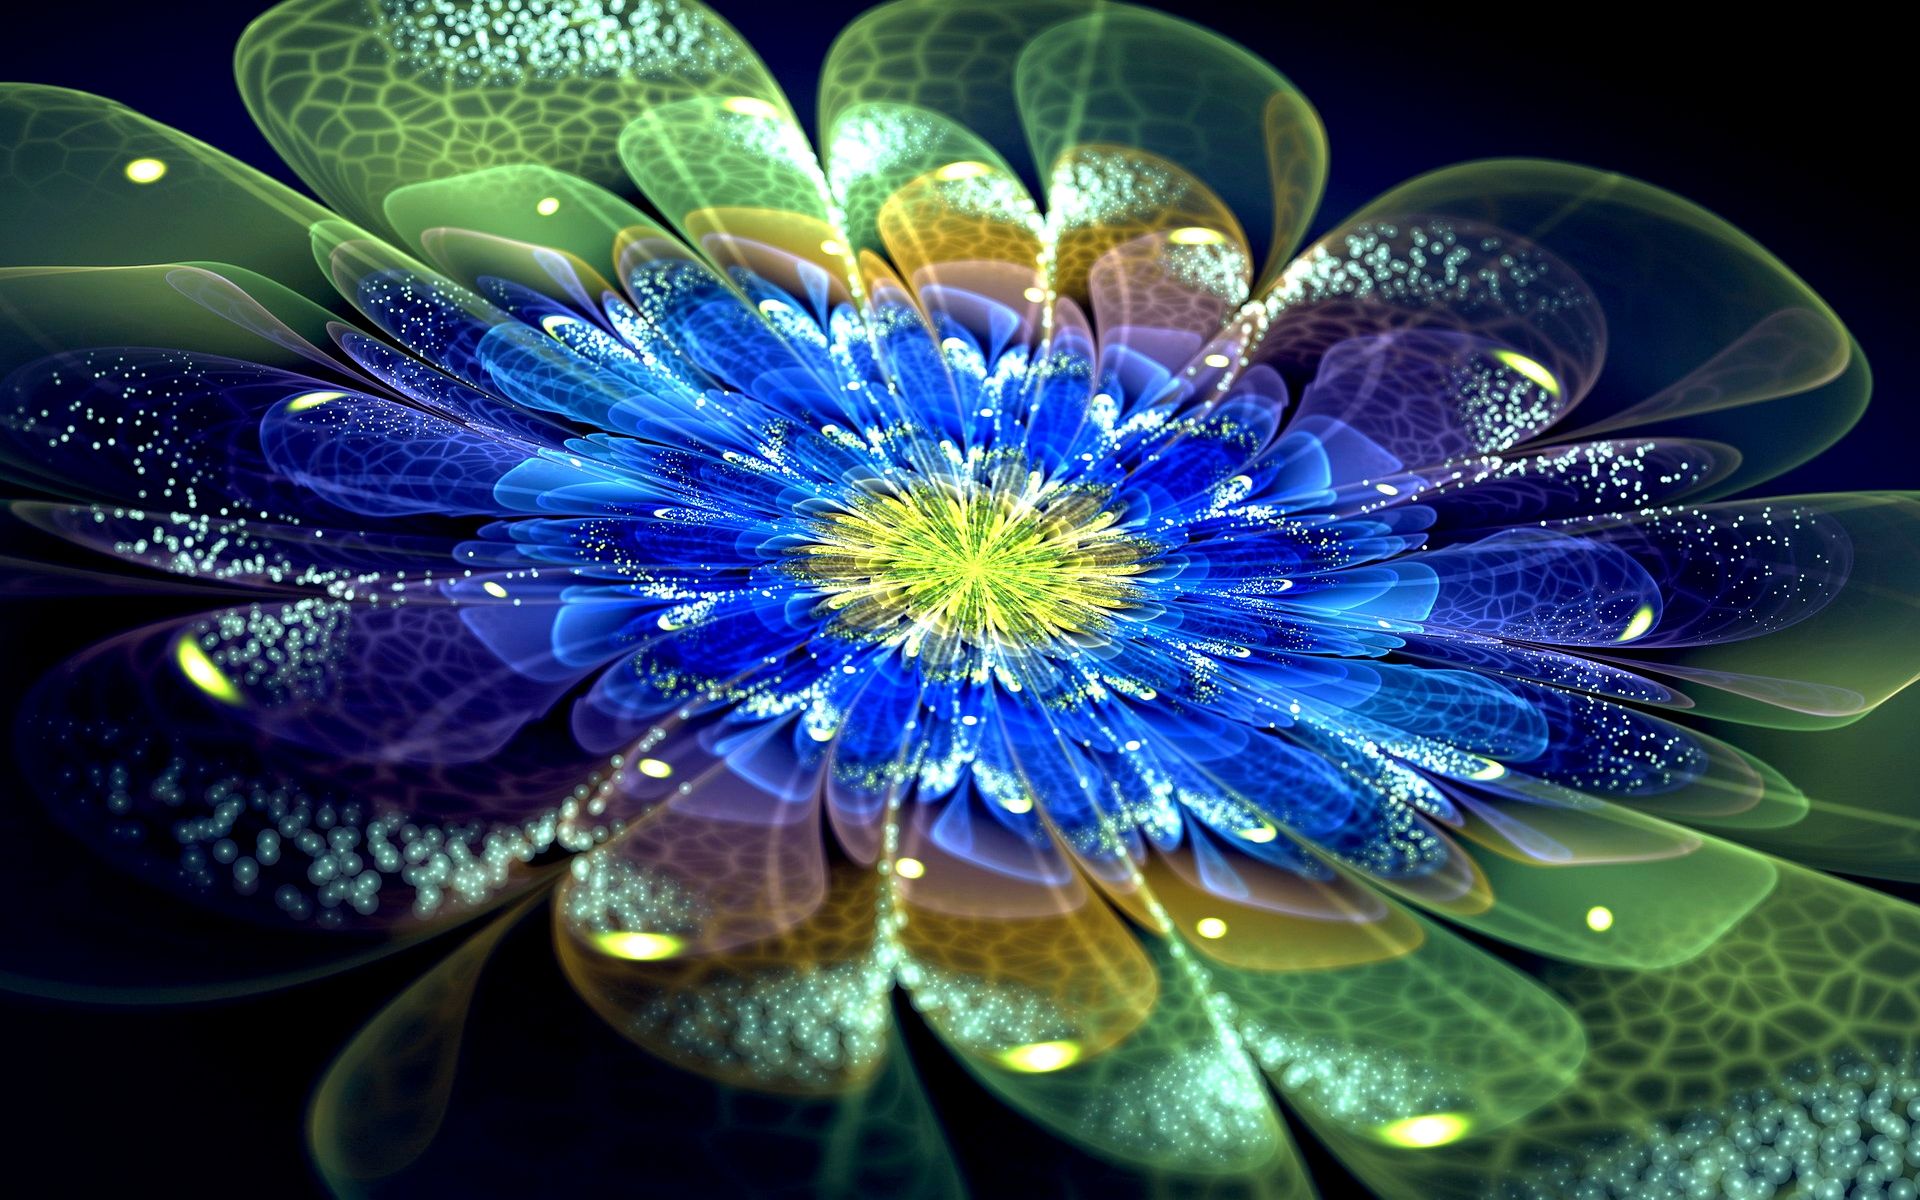 Neon Flowers Wallpaper for PC. Full HD Picture